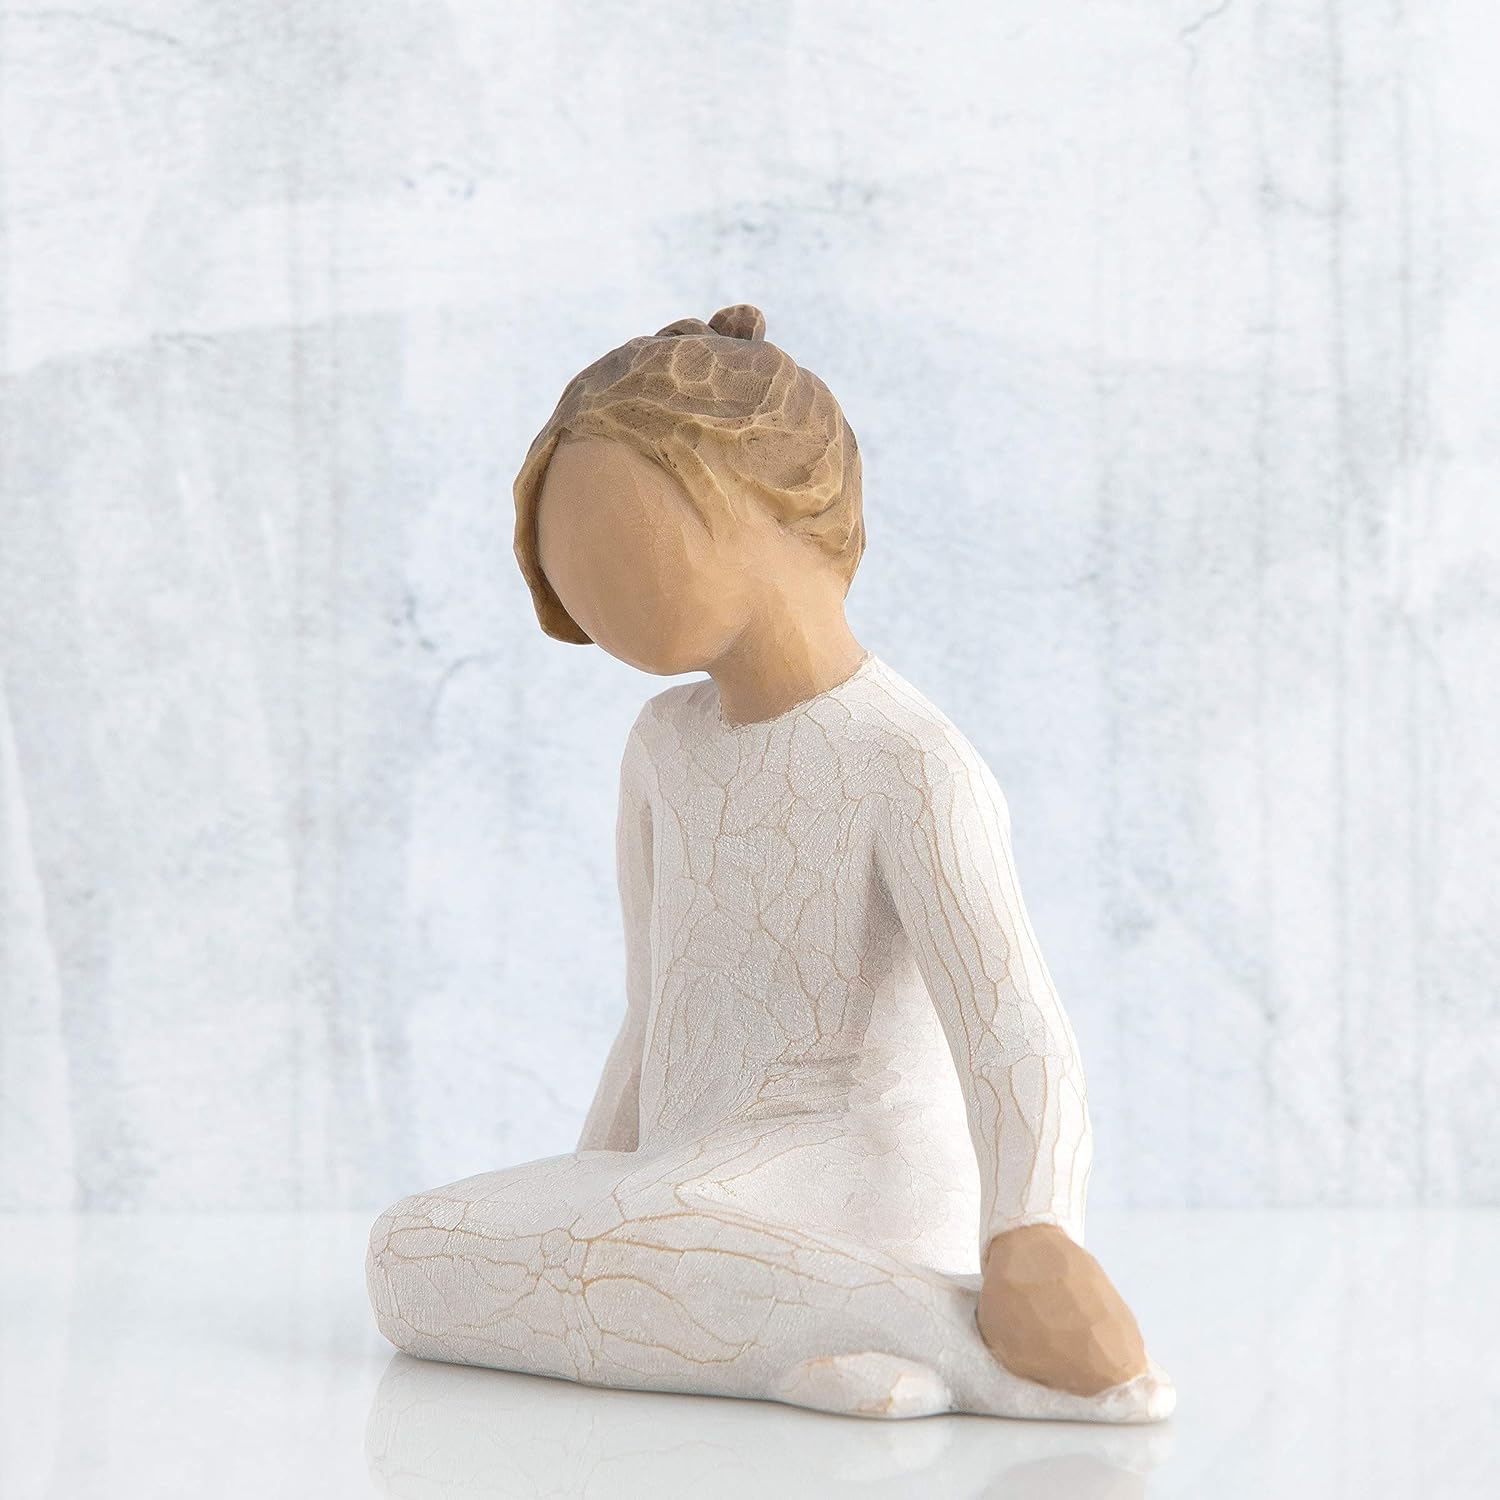 Thoughtful Child - Willow Tree Figur